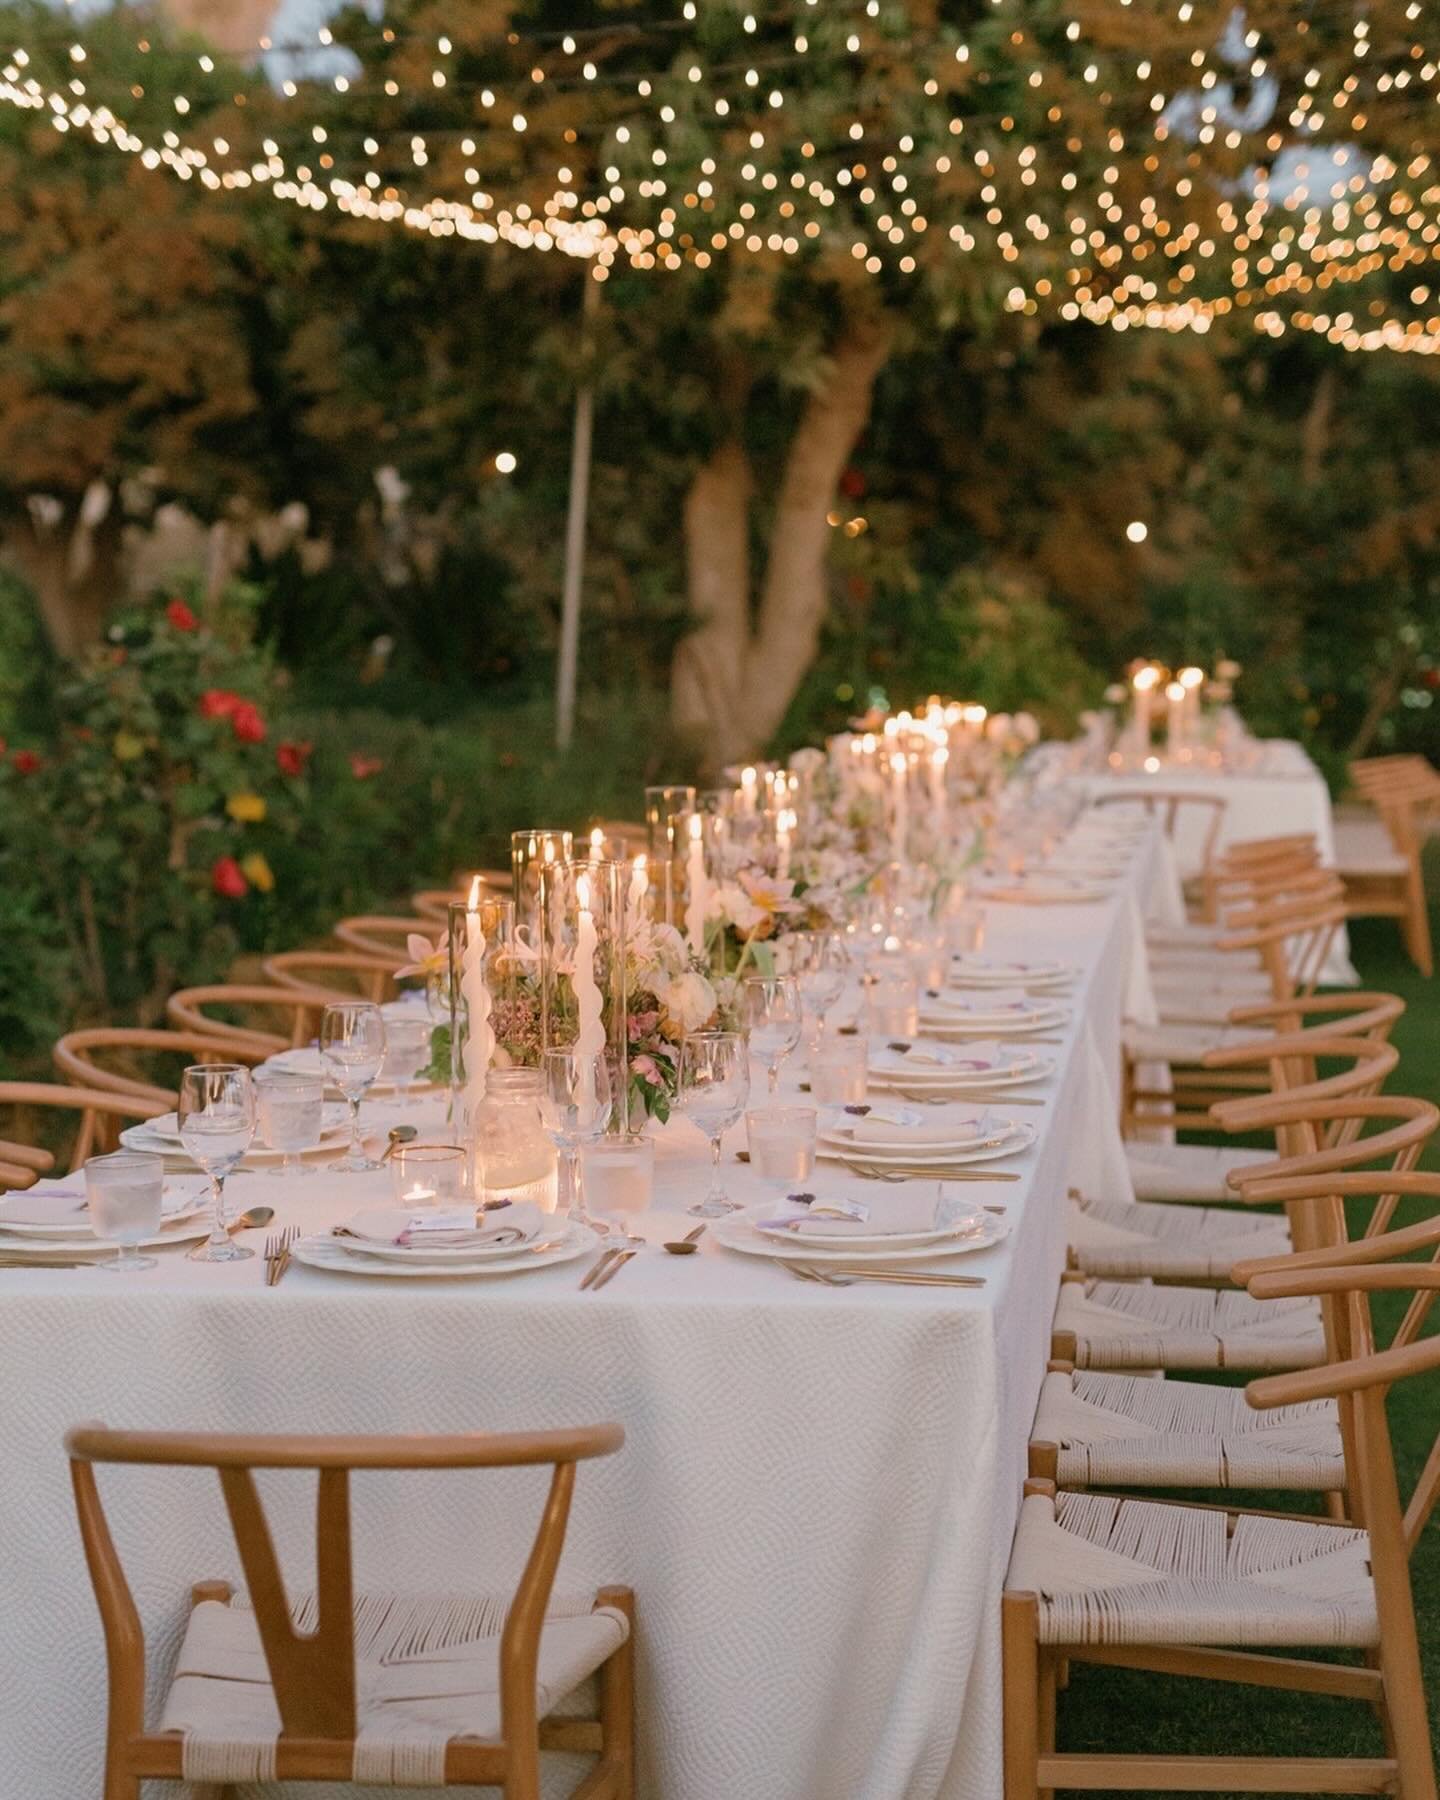 The exquisite wedding at the Mango Grove has been showcased on @stylemepretty .
Congratulations to the lovely bride and groom!

Planning @amyabbottevents 
Photography @logancolephoto 
Venue @erikaonthefarm @florafarms